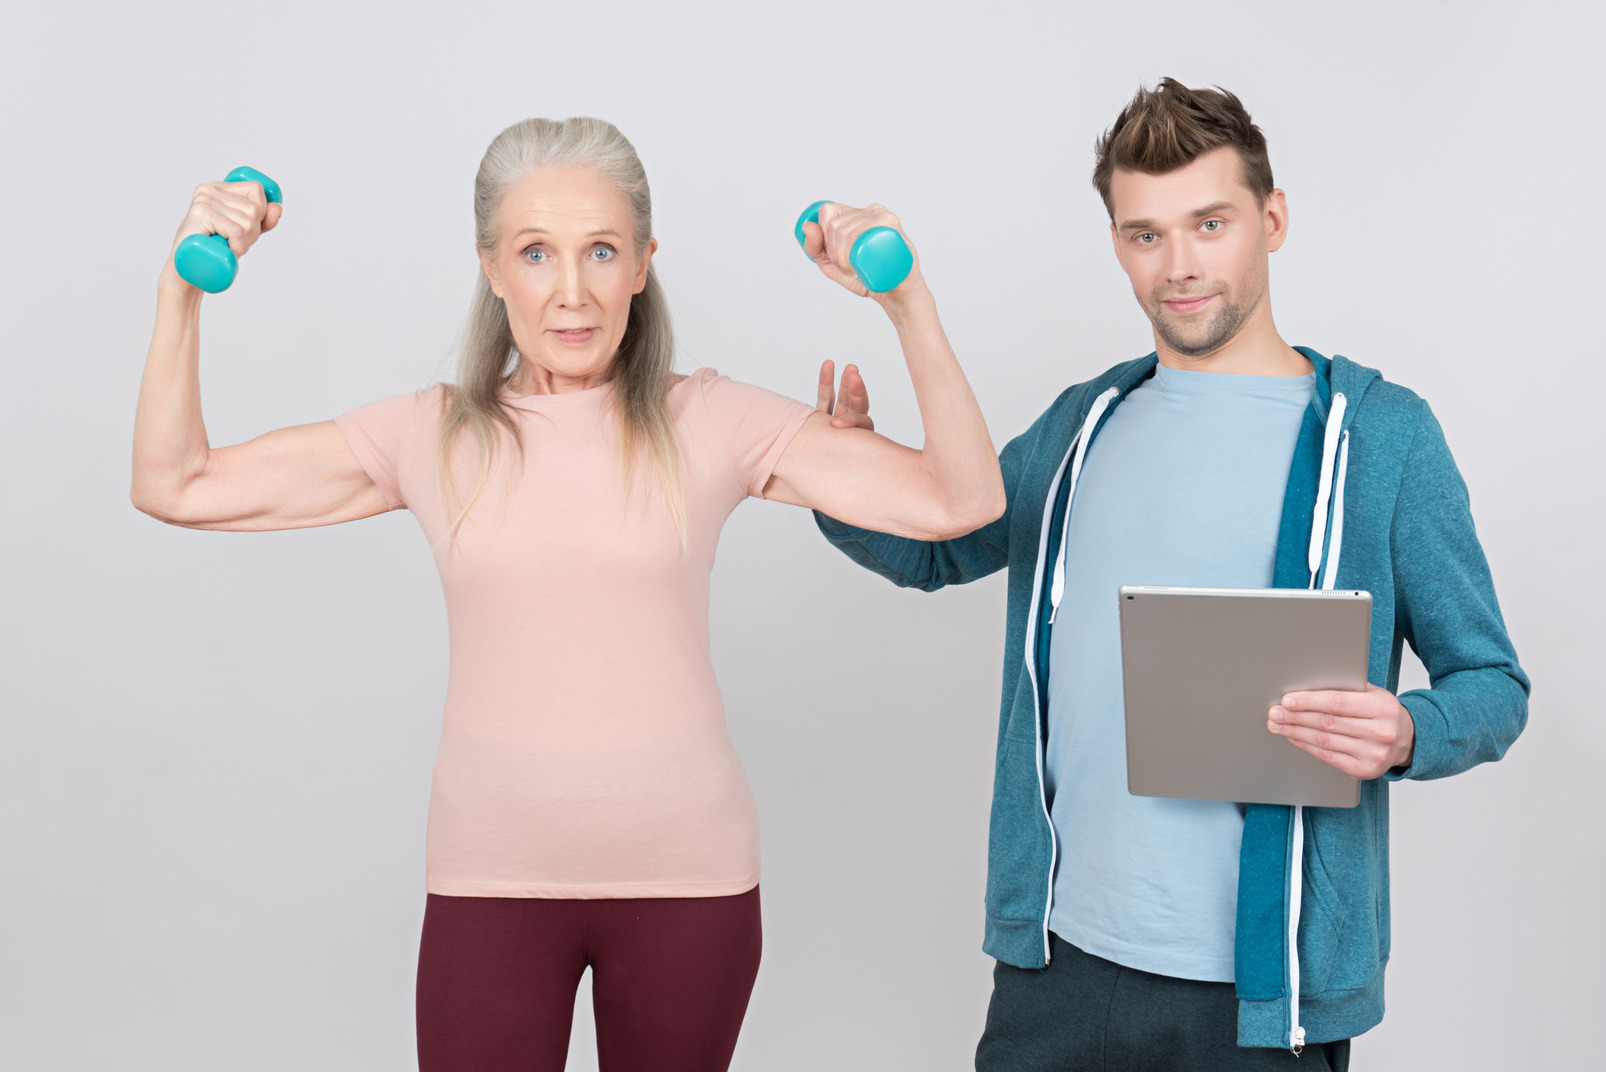 Young guy holding tablet and old woman lifting hand weights and showing her muscles